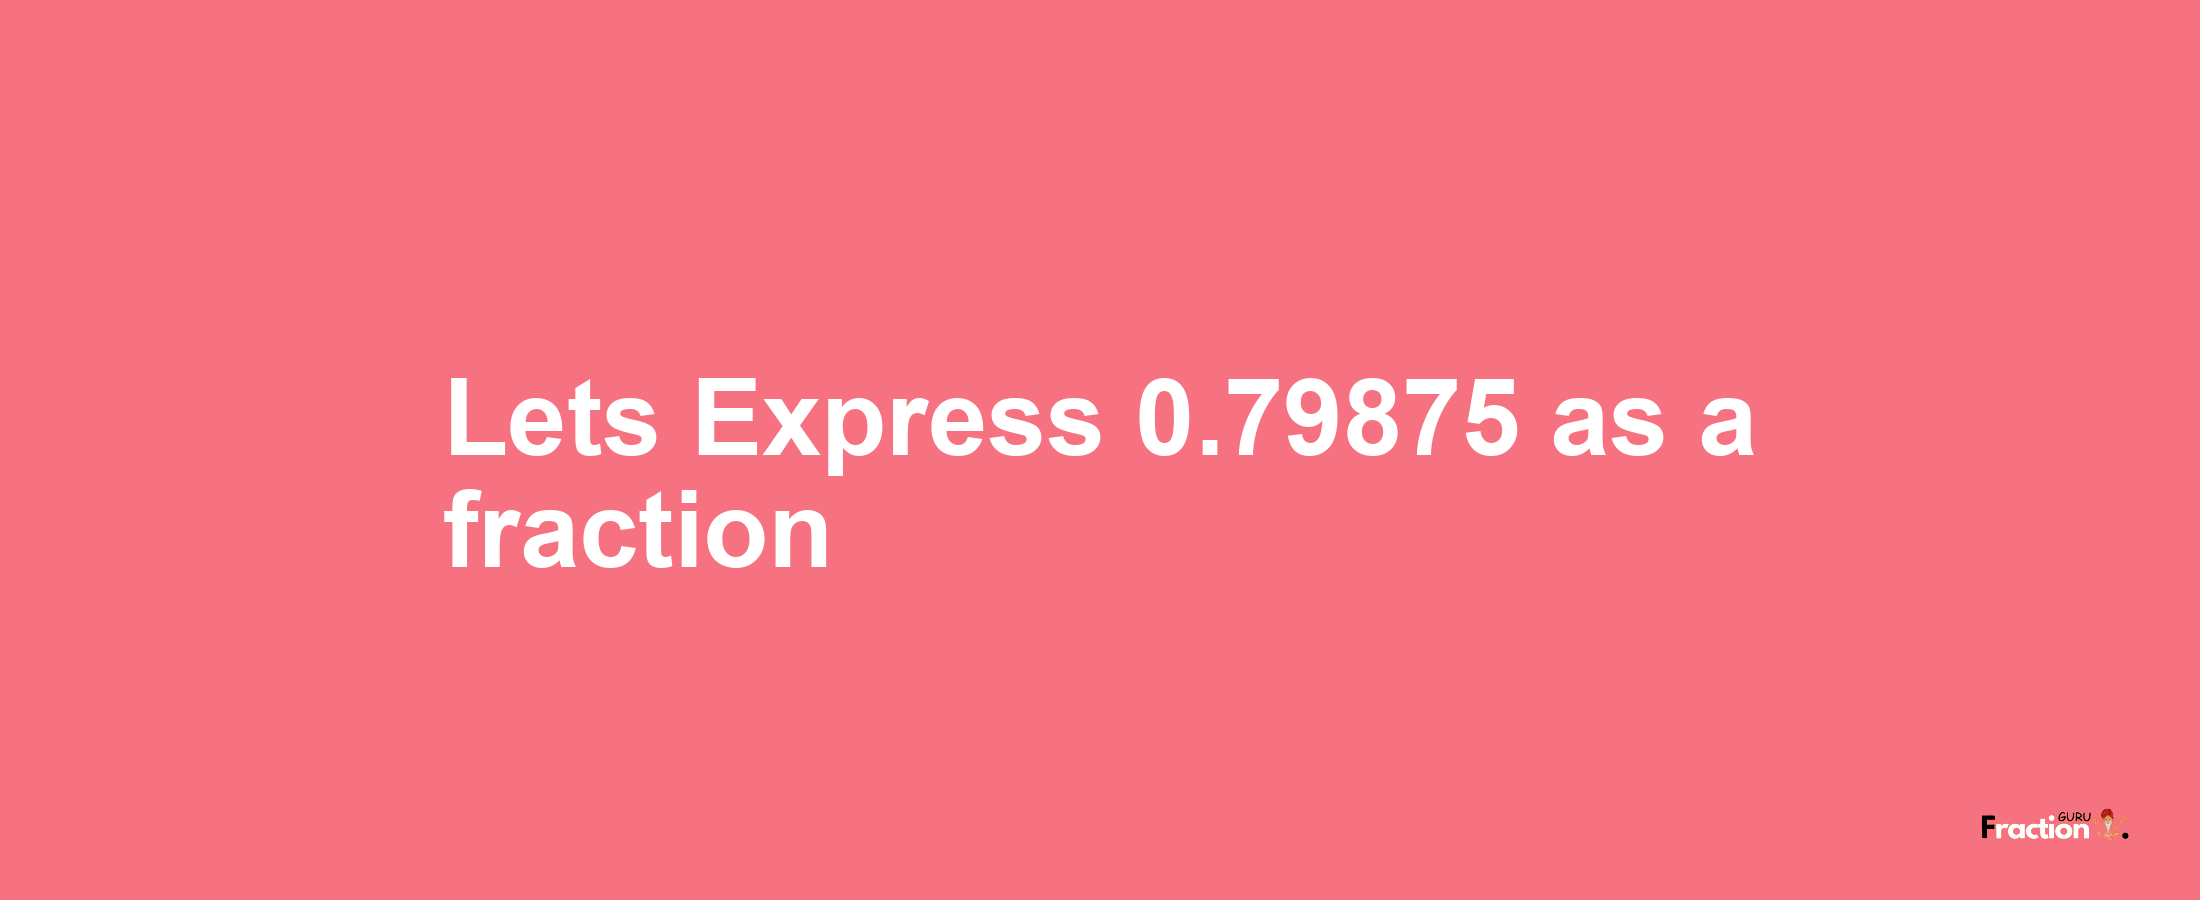 Lets Express 0.79875 as afraction